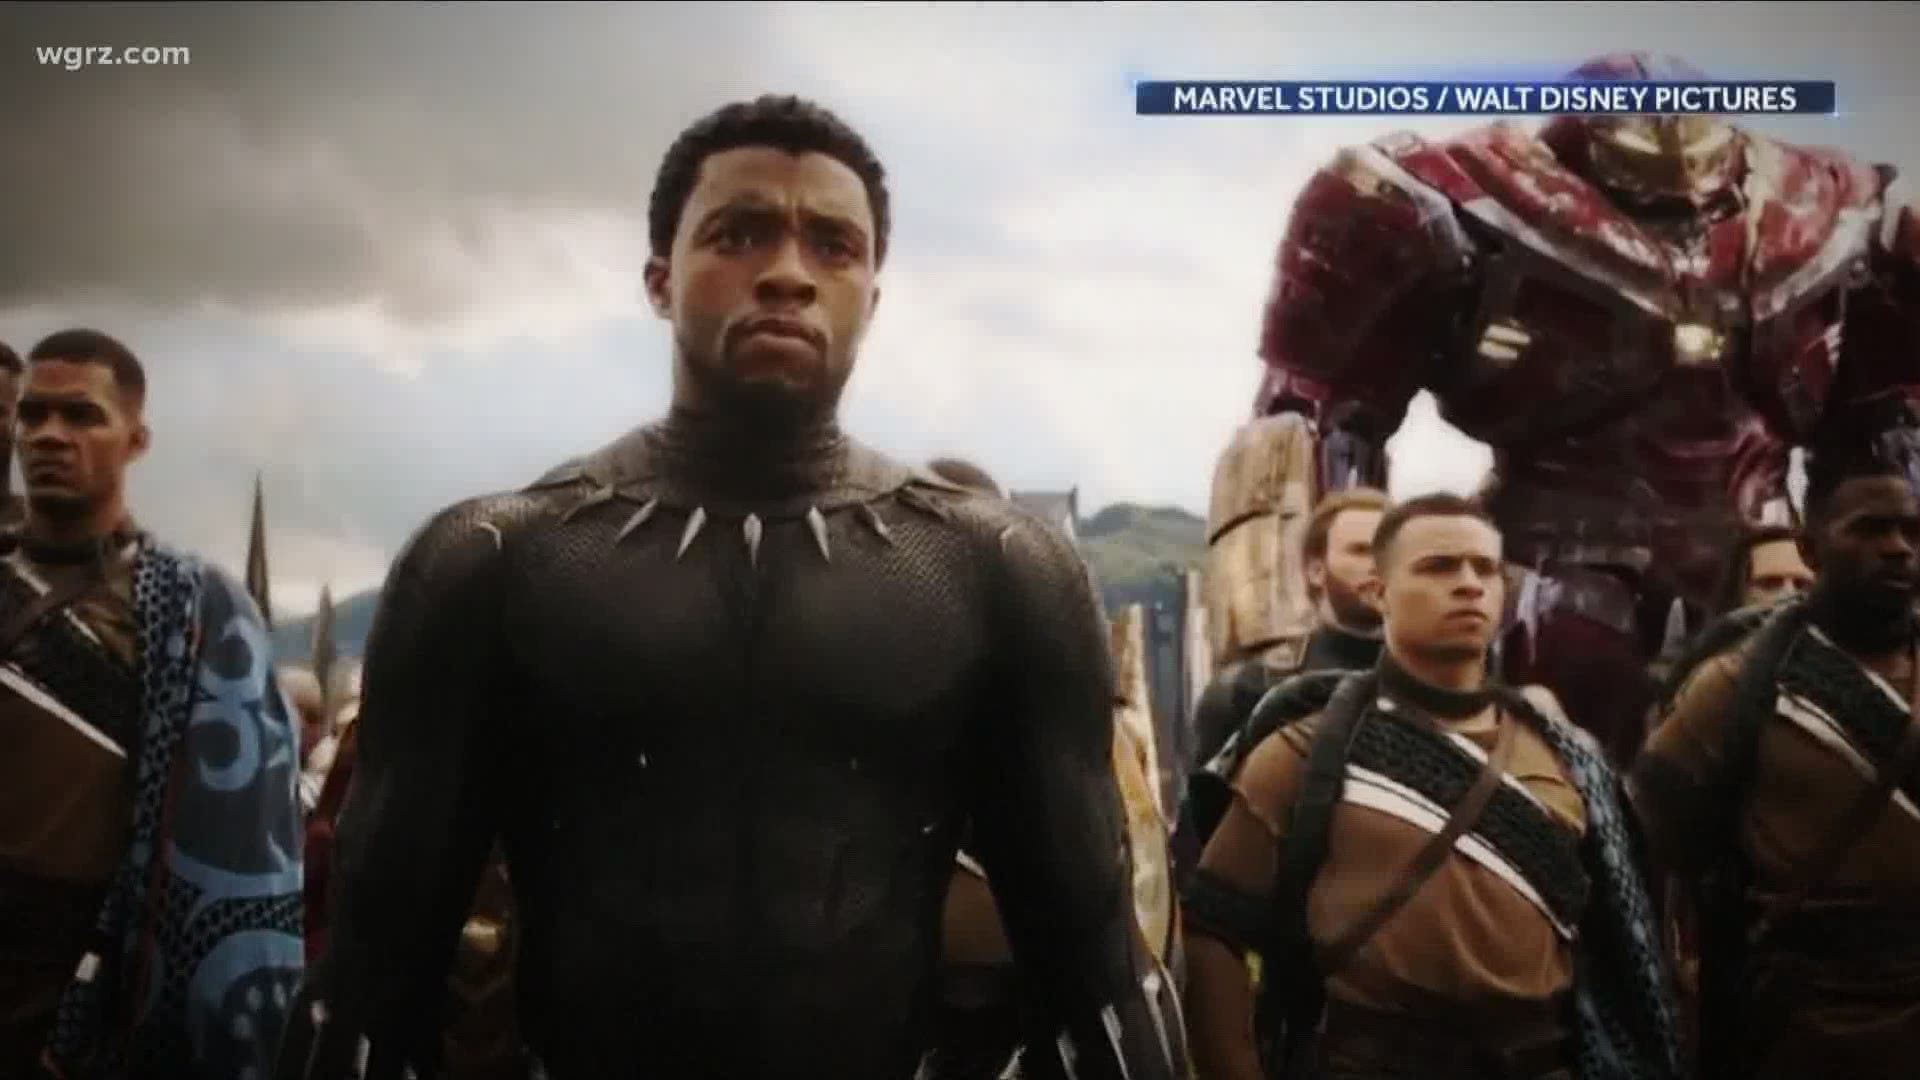 Chadwick Boseman's life will be celebrated the rest of the year in Buffalo